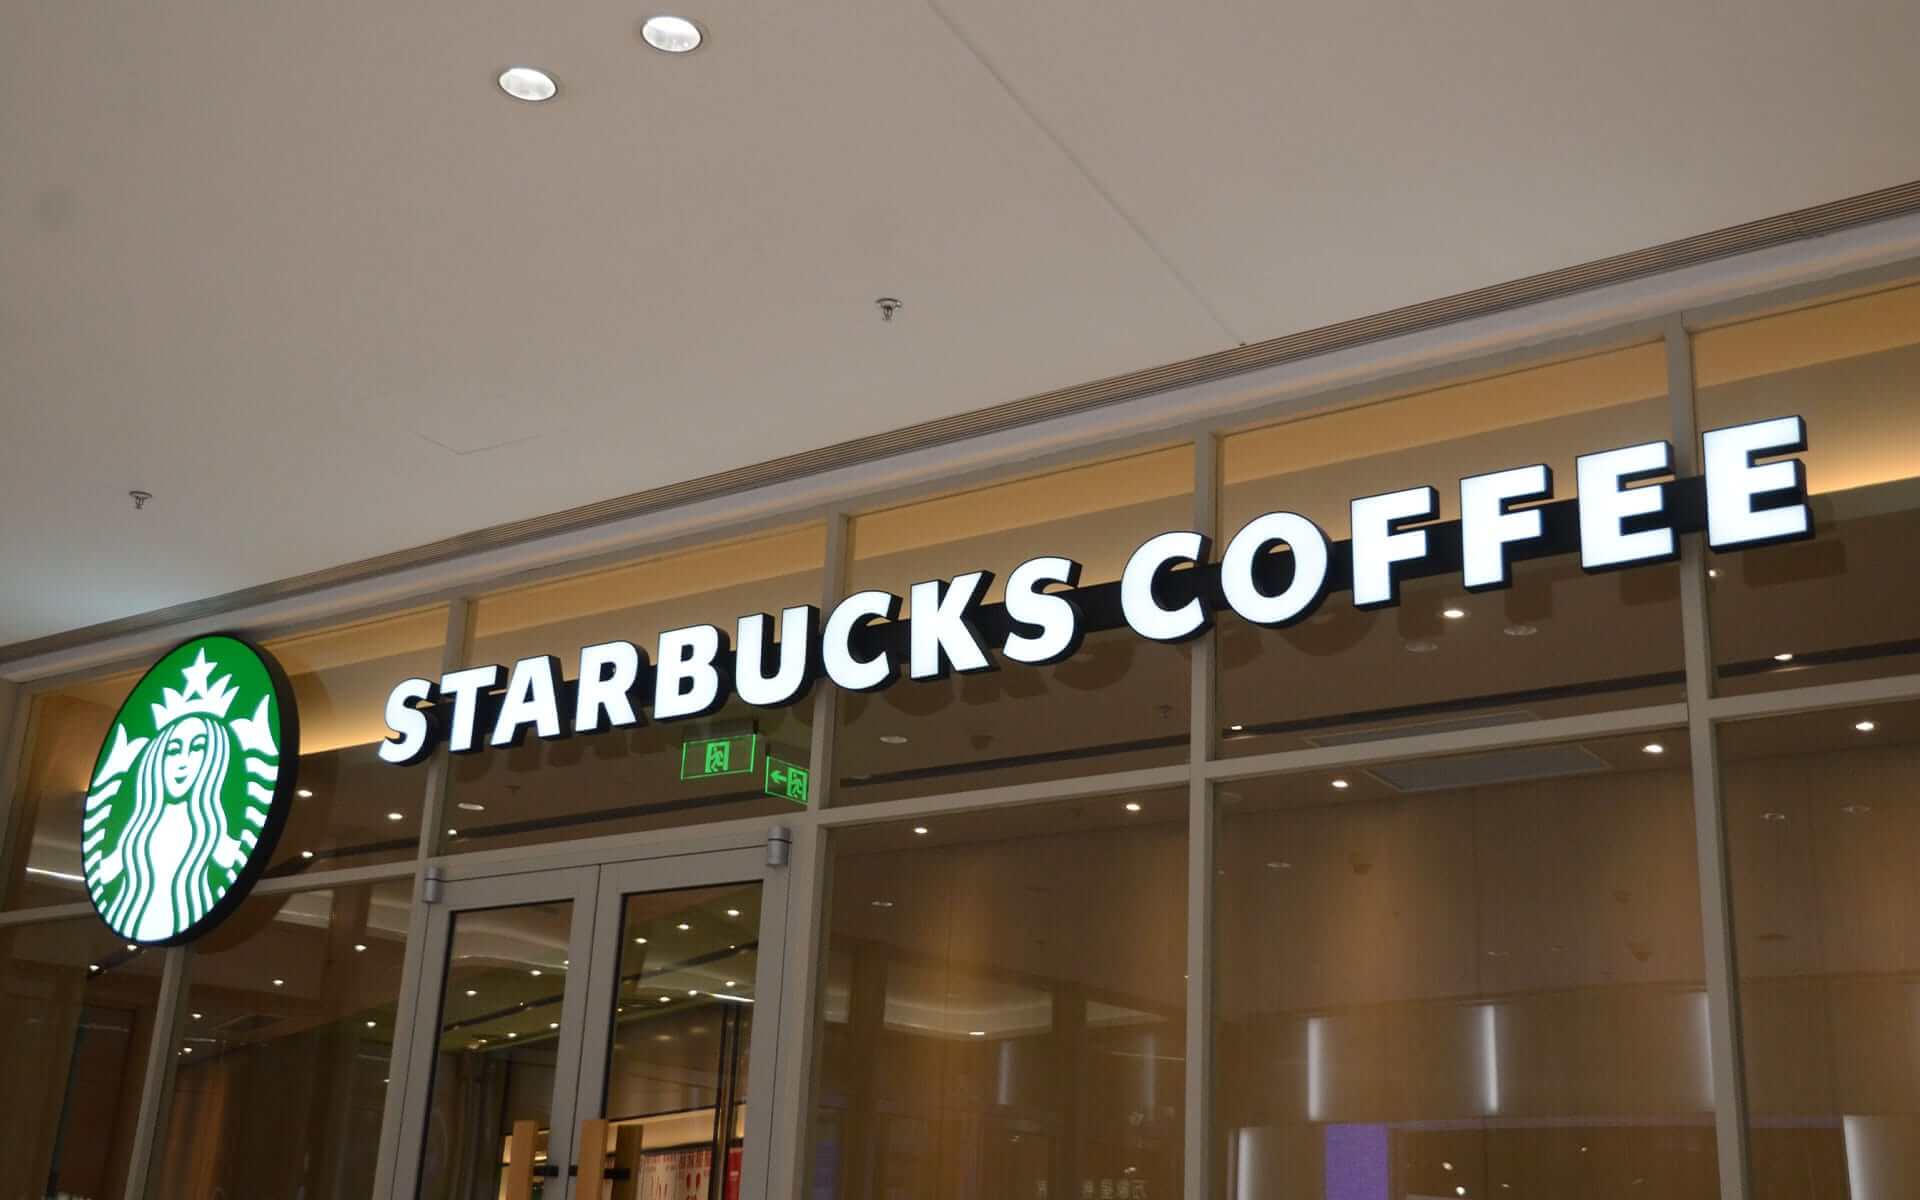 Trim Face-lit Metal Channel Letters for Starbucks Coffee